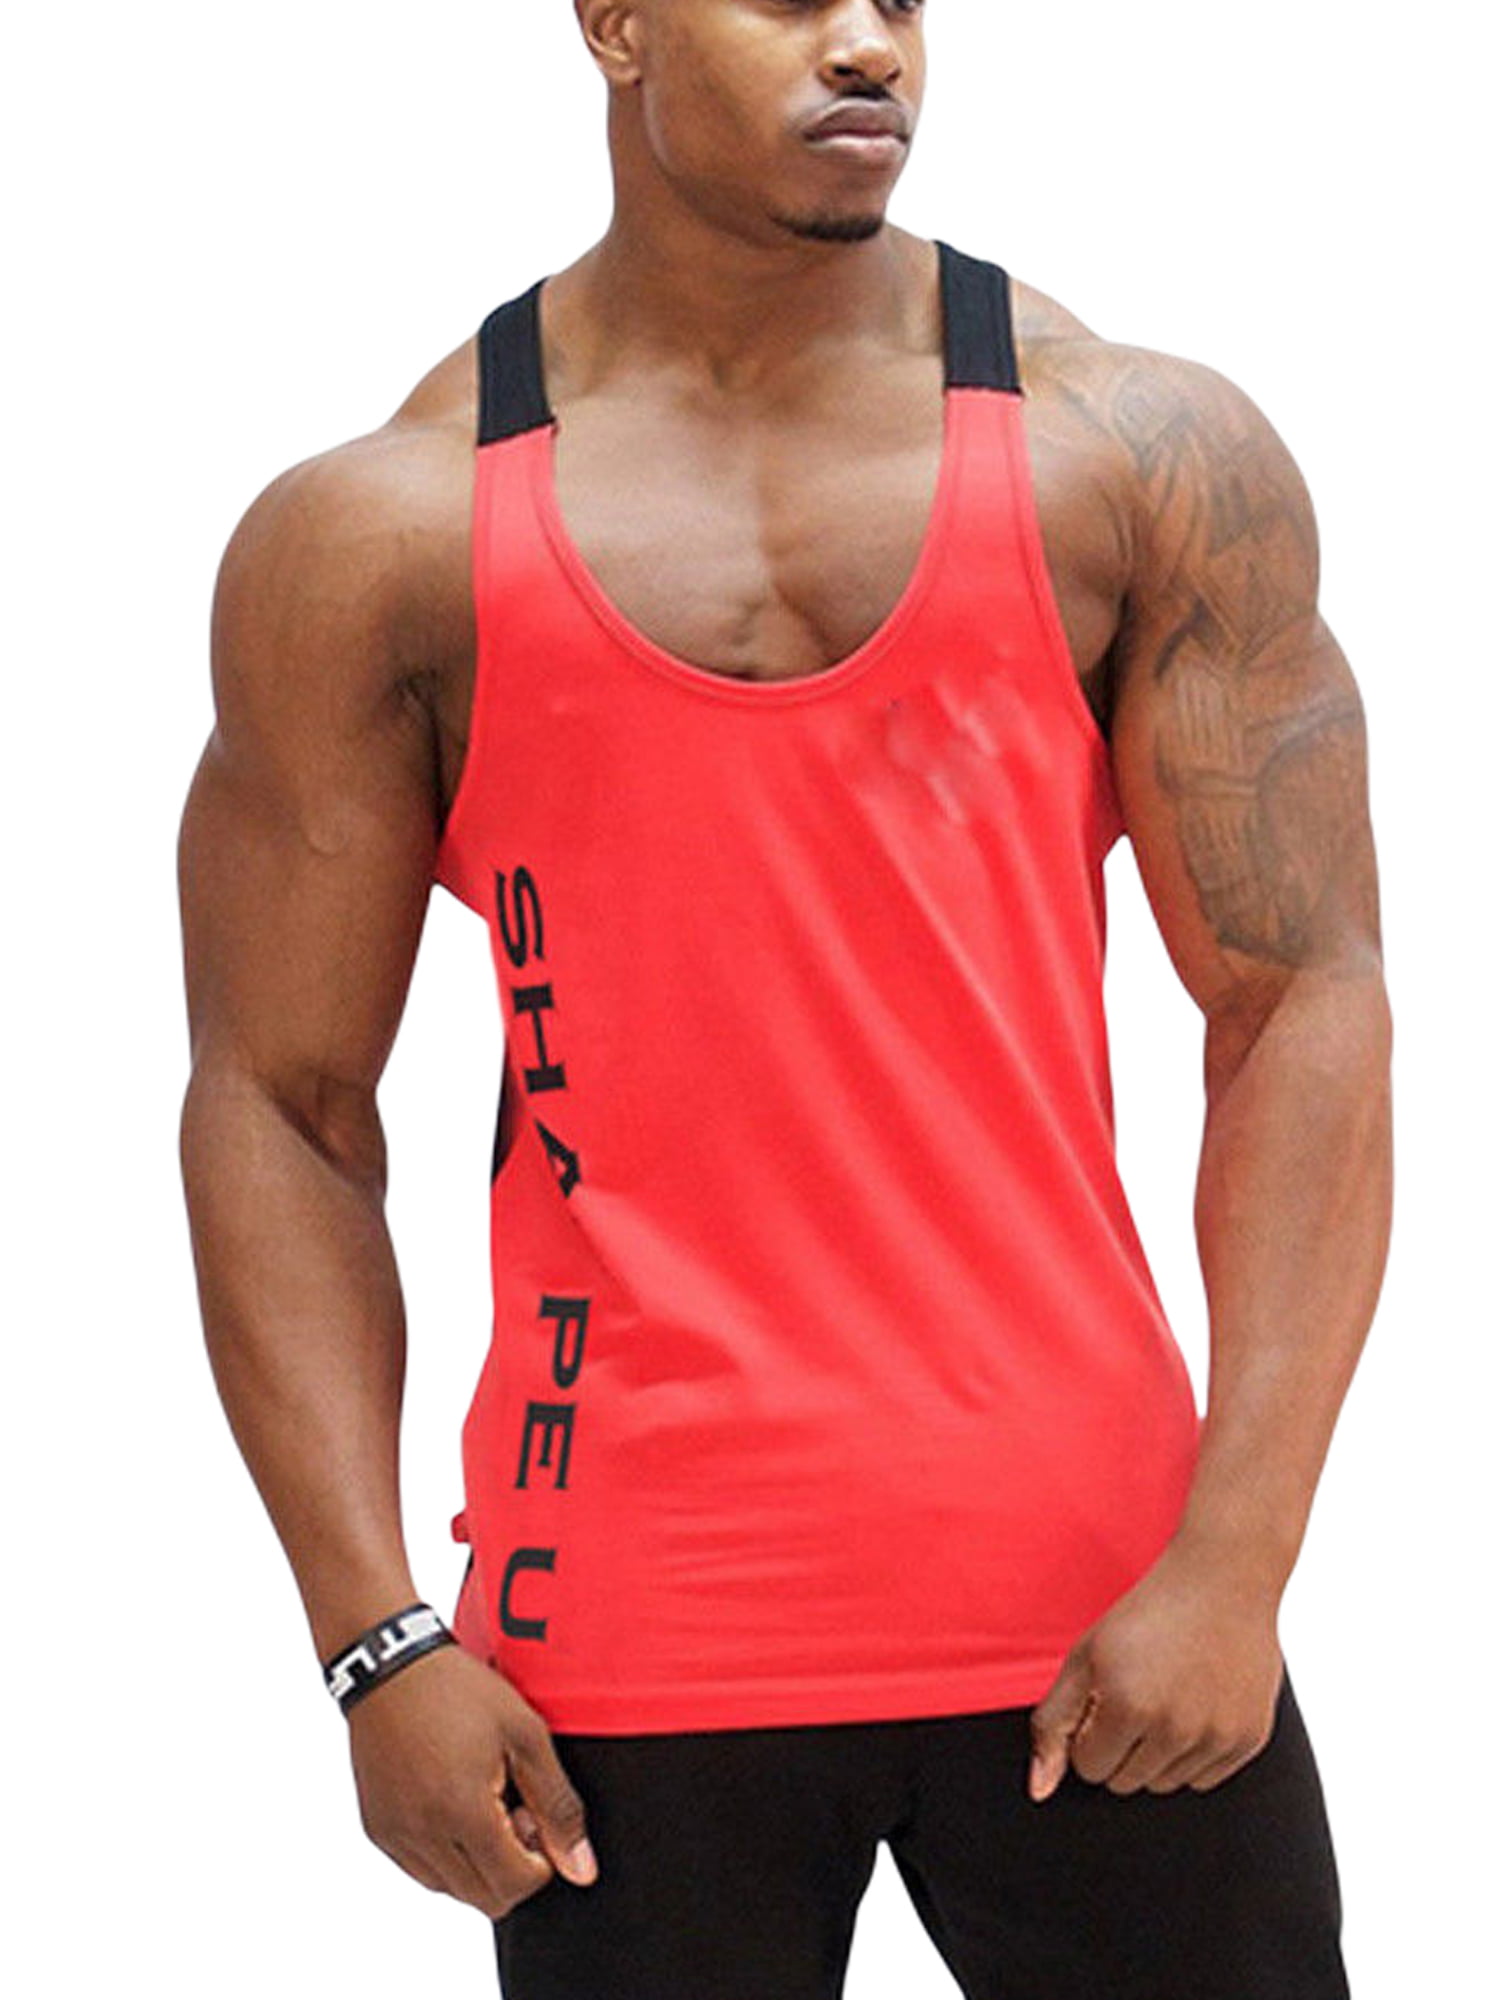 Sleeveless Vest Sports Gym Muscle Fit Top Mens Size 